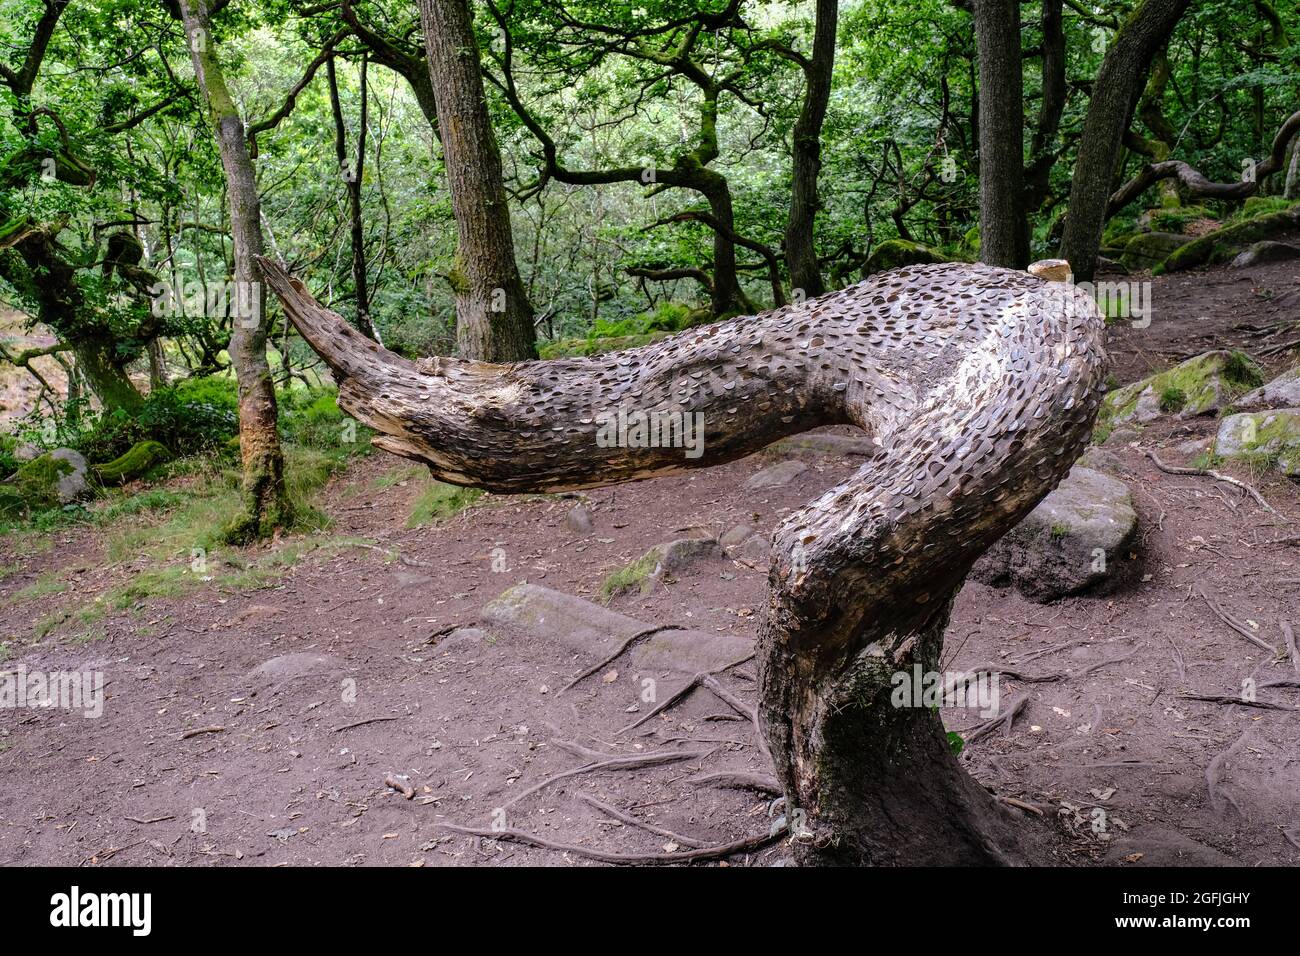 A money tree in the fairy tale surroundings of Padley Gorge, Derbyshire Stock Photo